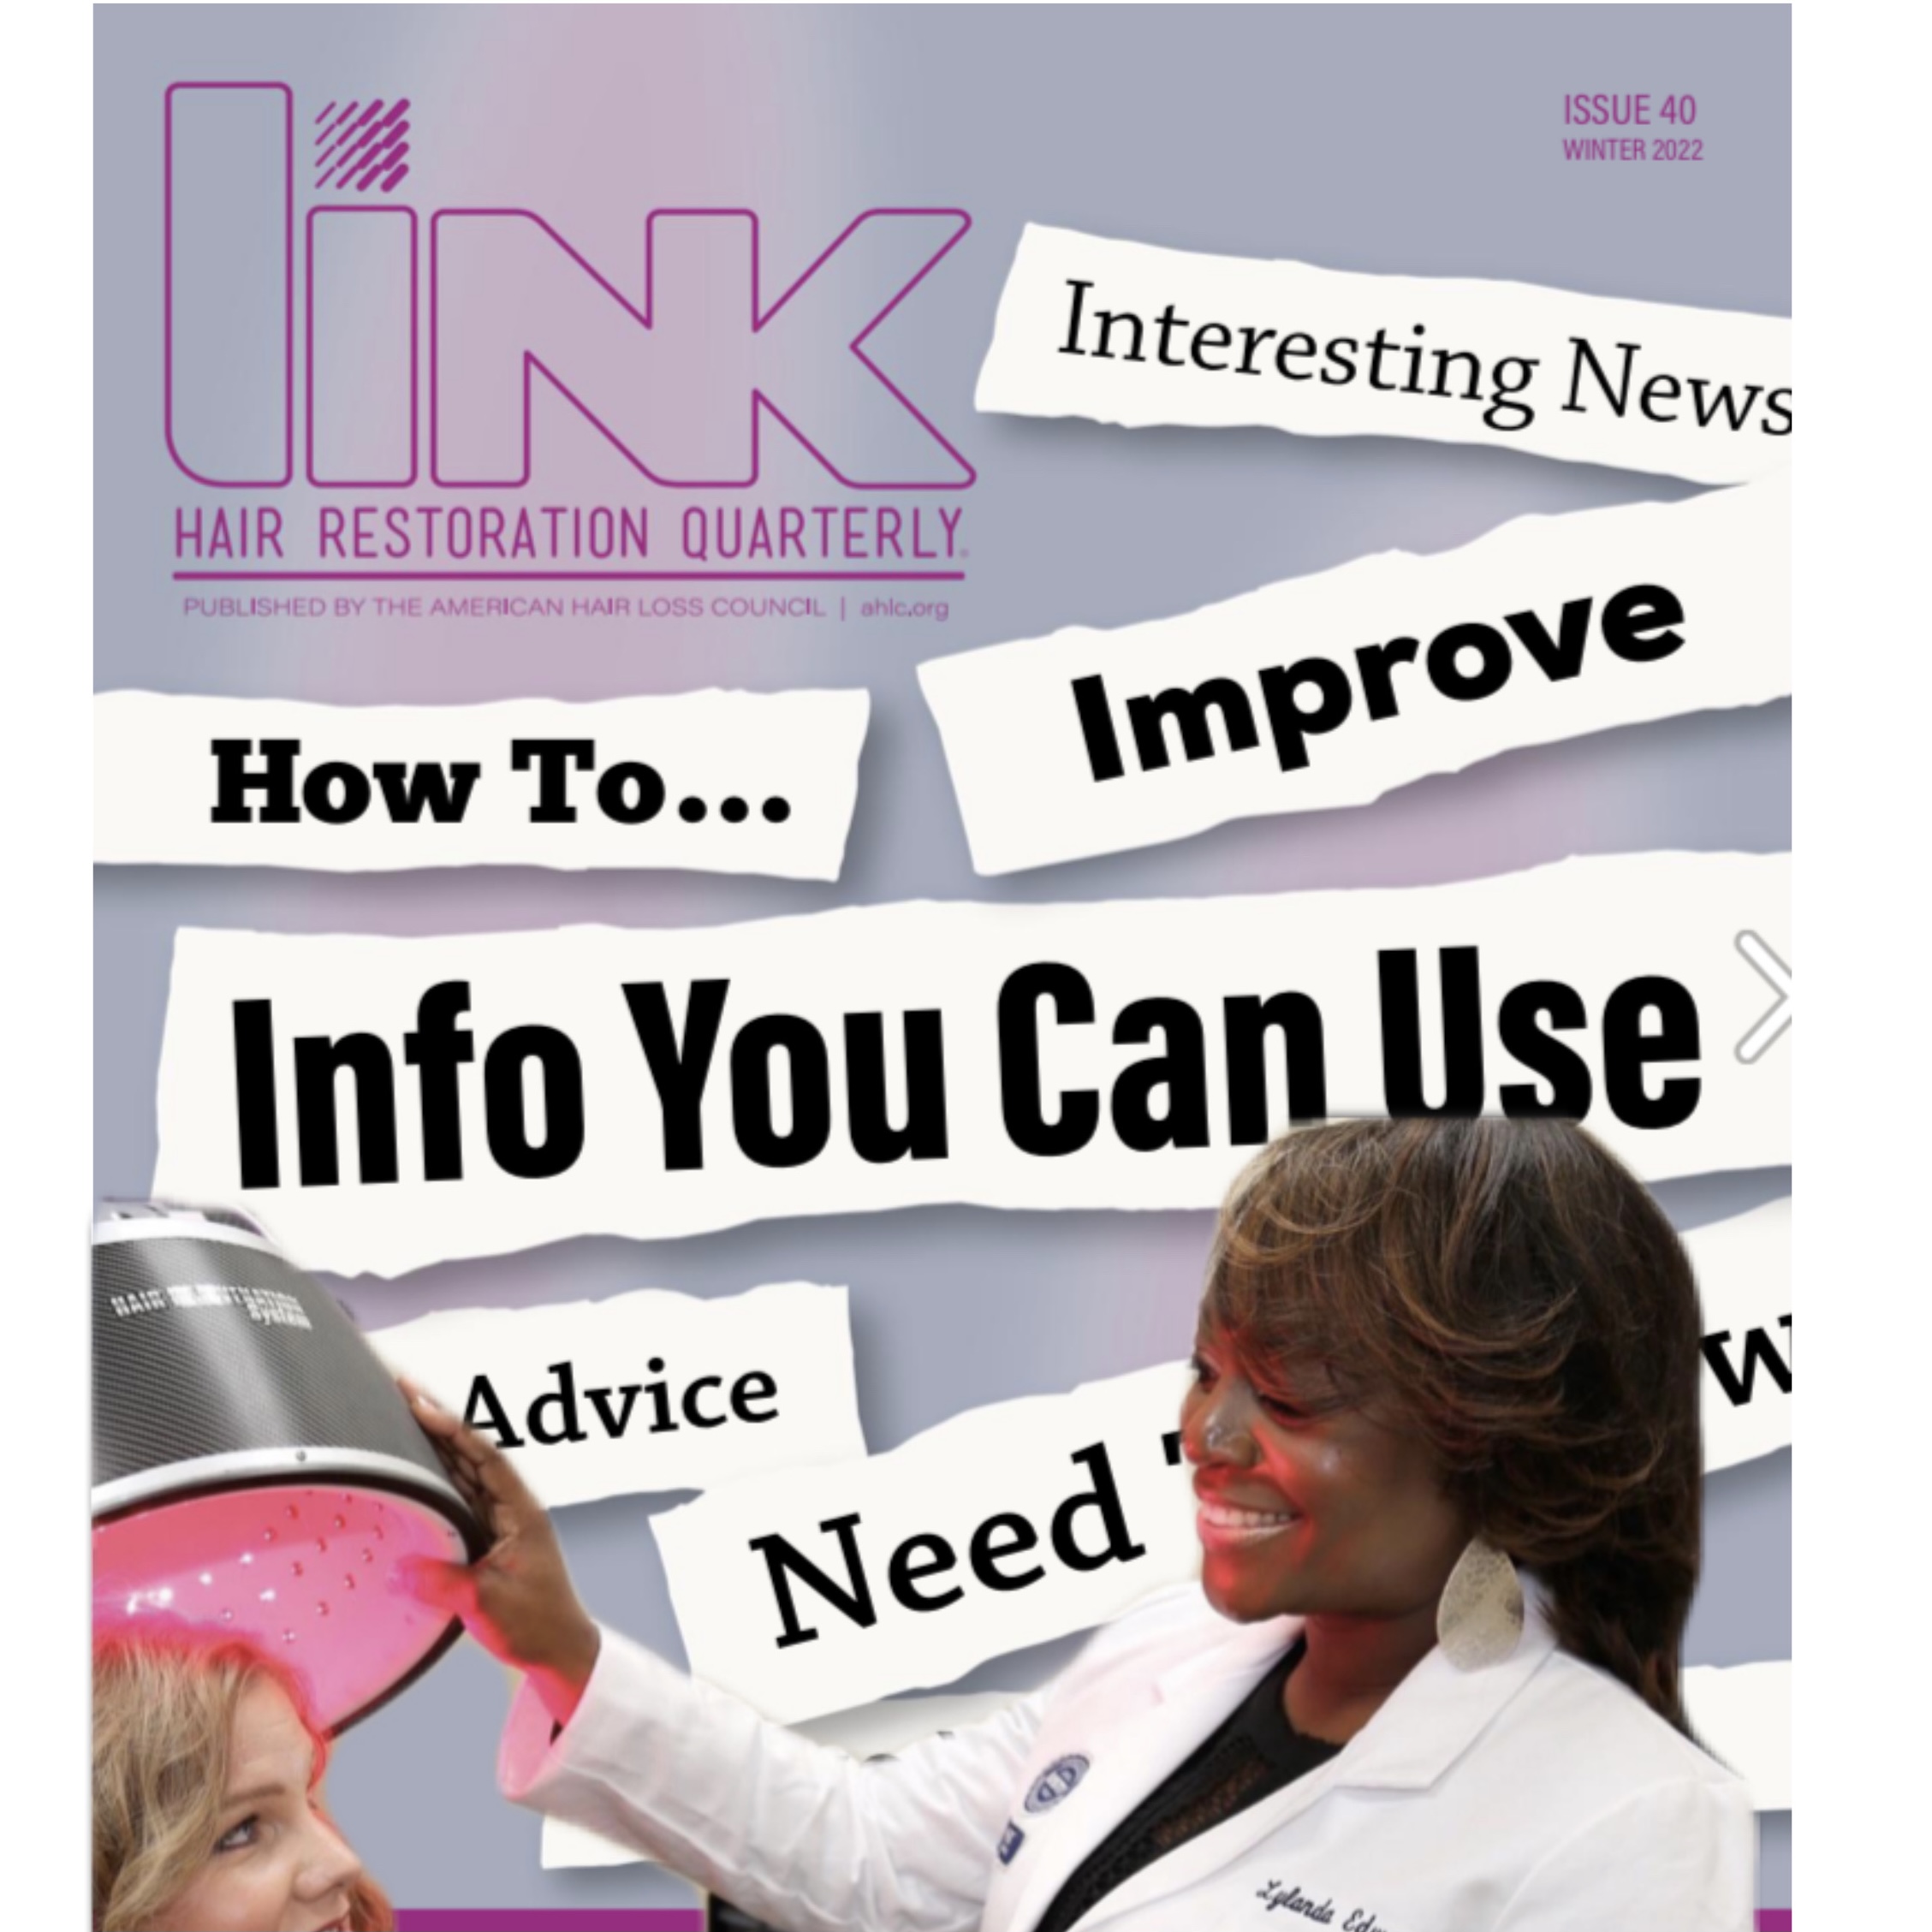 A woman is brushing her hair on the cover of link magazine.